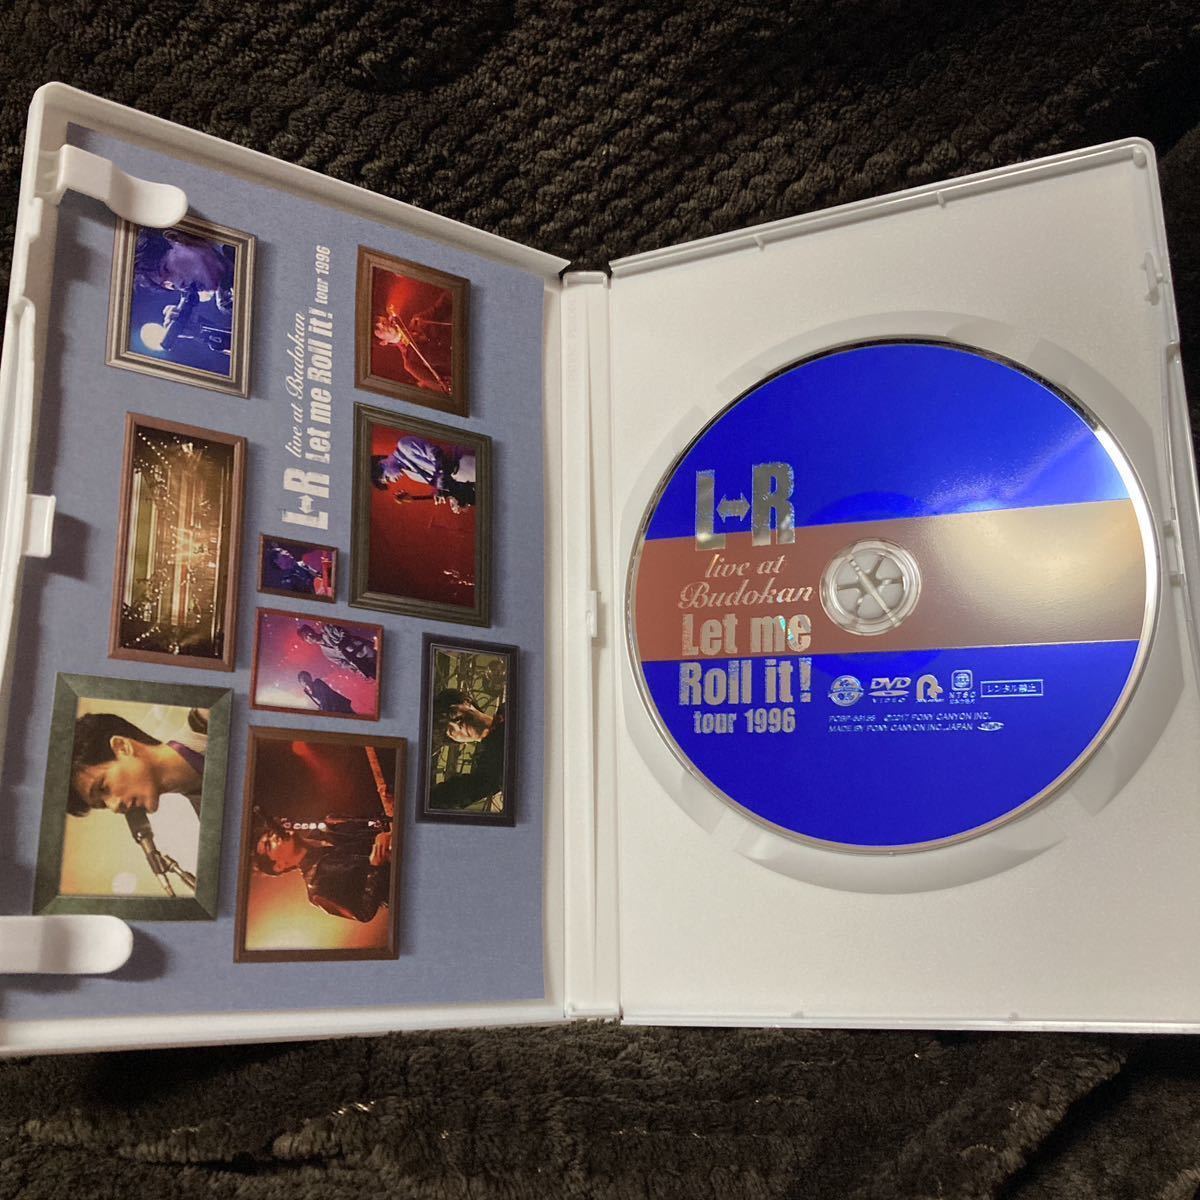 L⇔R ★ DVD 2枚セット【Doubt tour at NHK hall〜last live 1997〜】【live at Budokan Let me Roll it! tour 1996 】◆_画像7